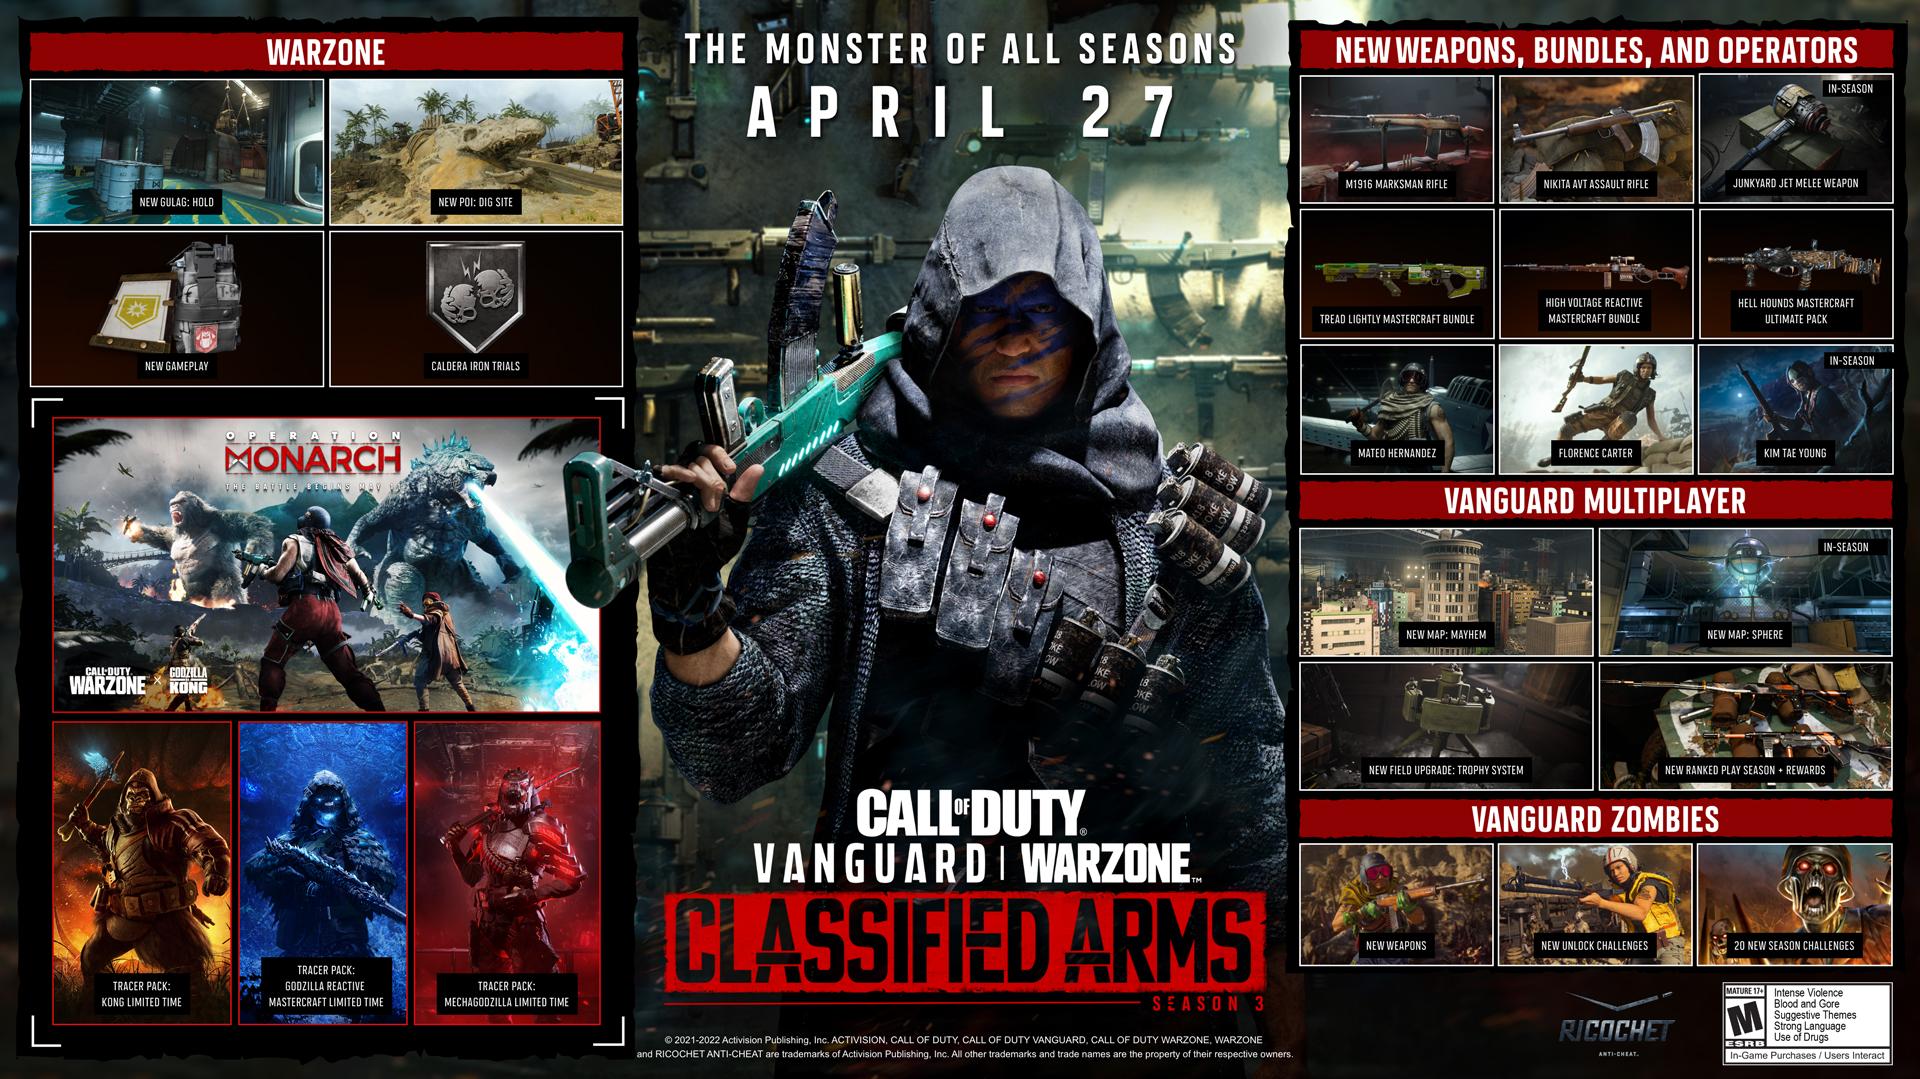 Call of Duty Vanguard and Warzone Classified Arms Season